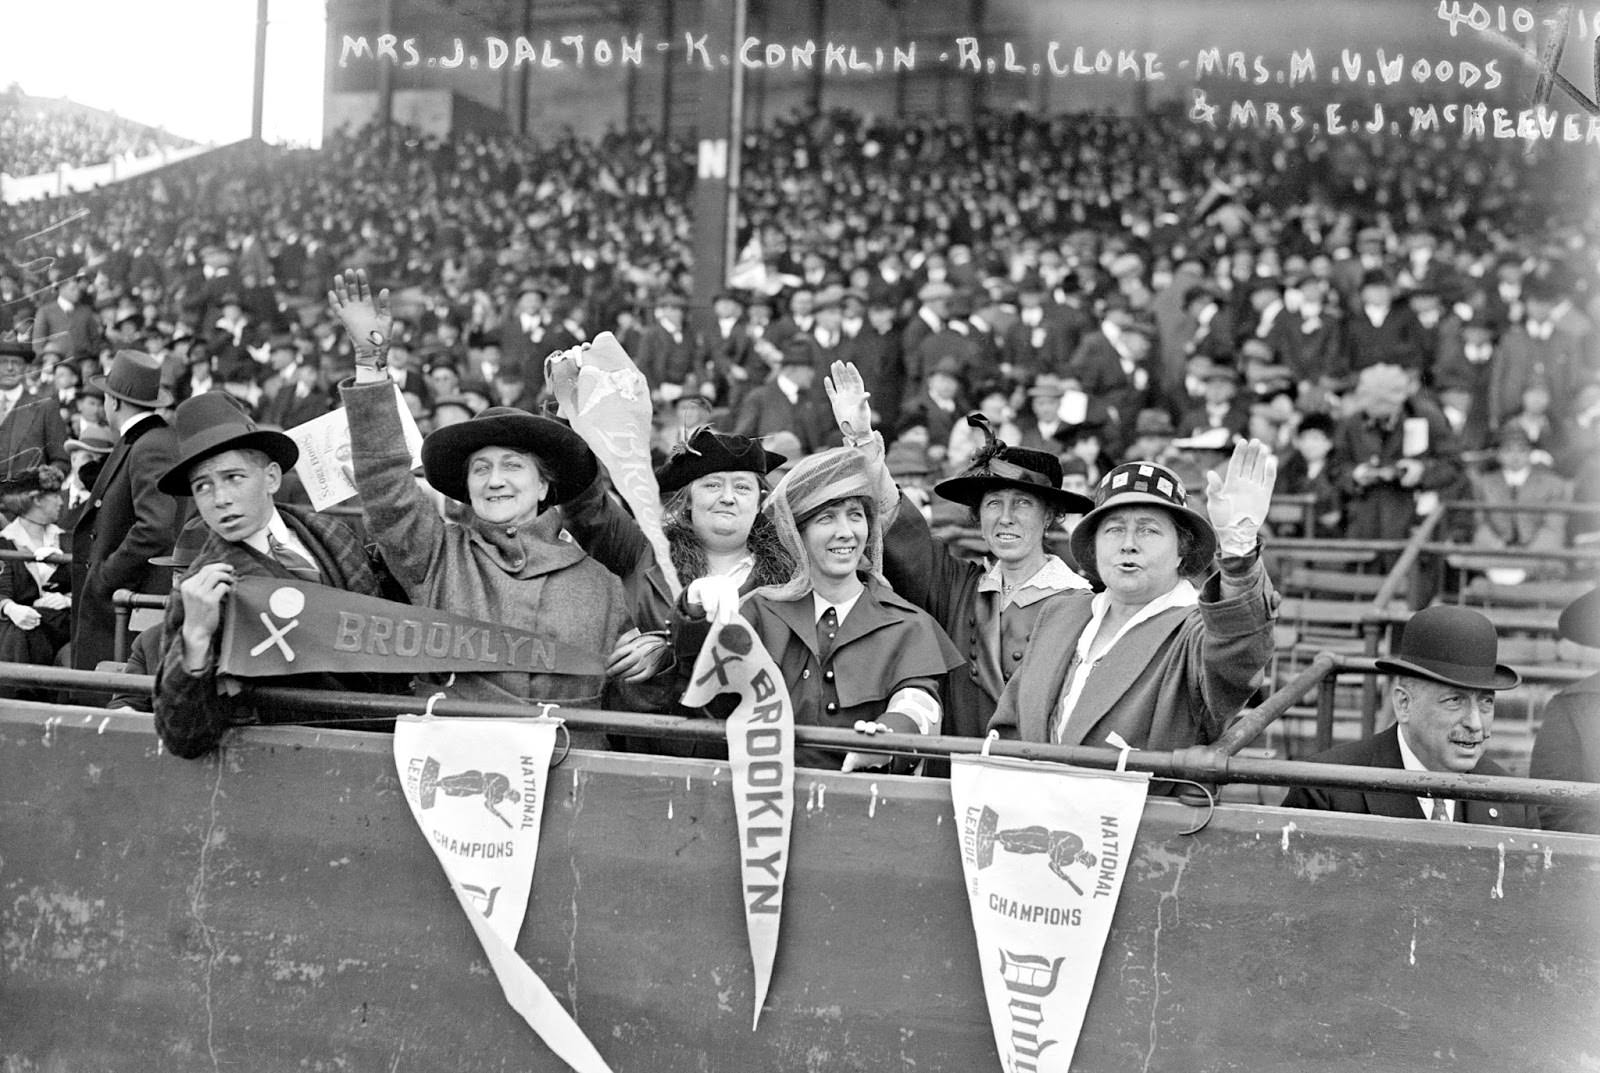 Brooklyn baseball fans at the 1916 World Series seated with Jennie Veronica